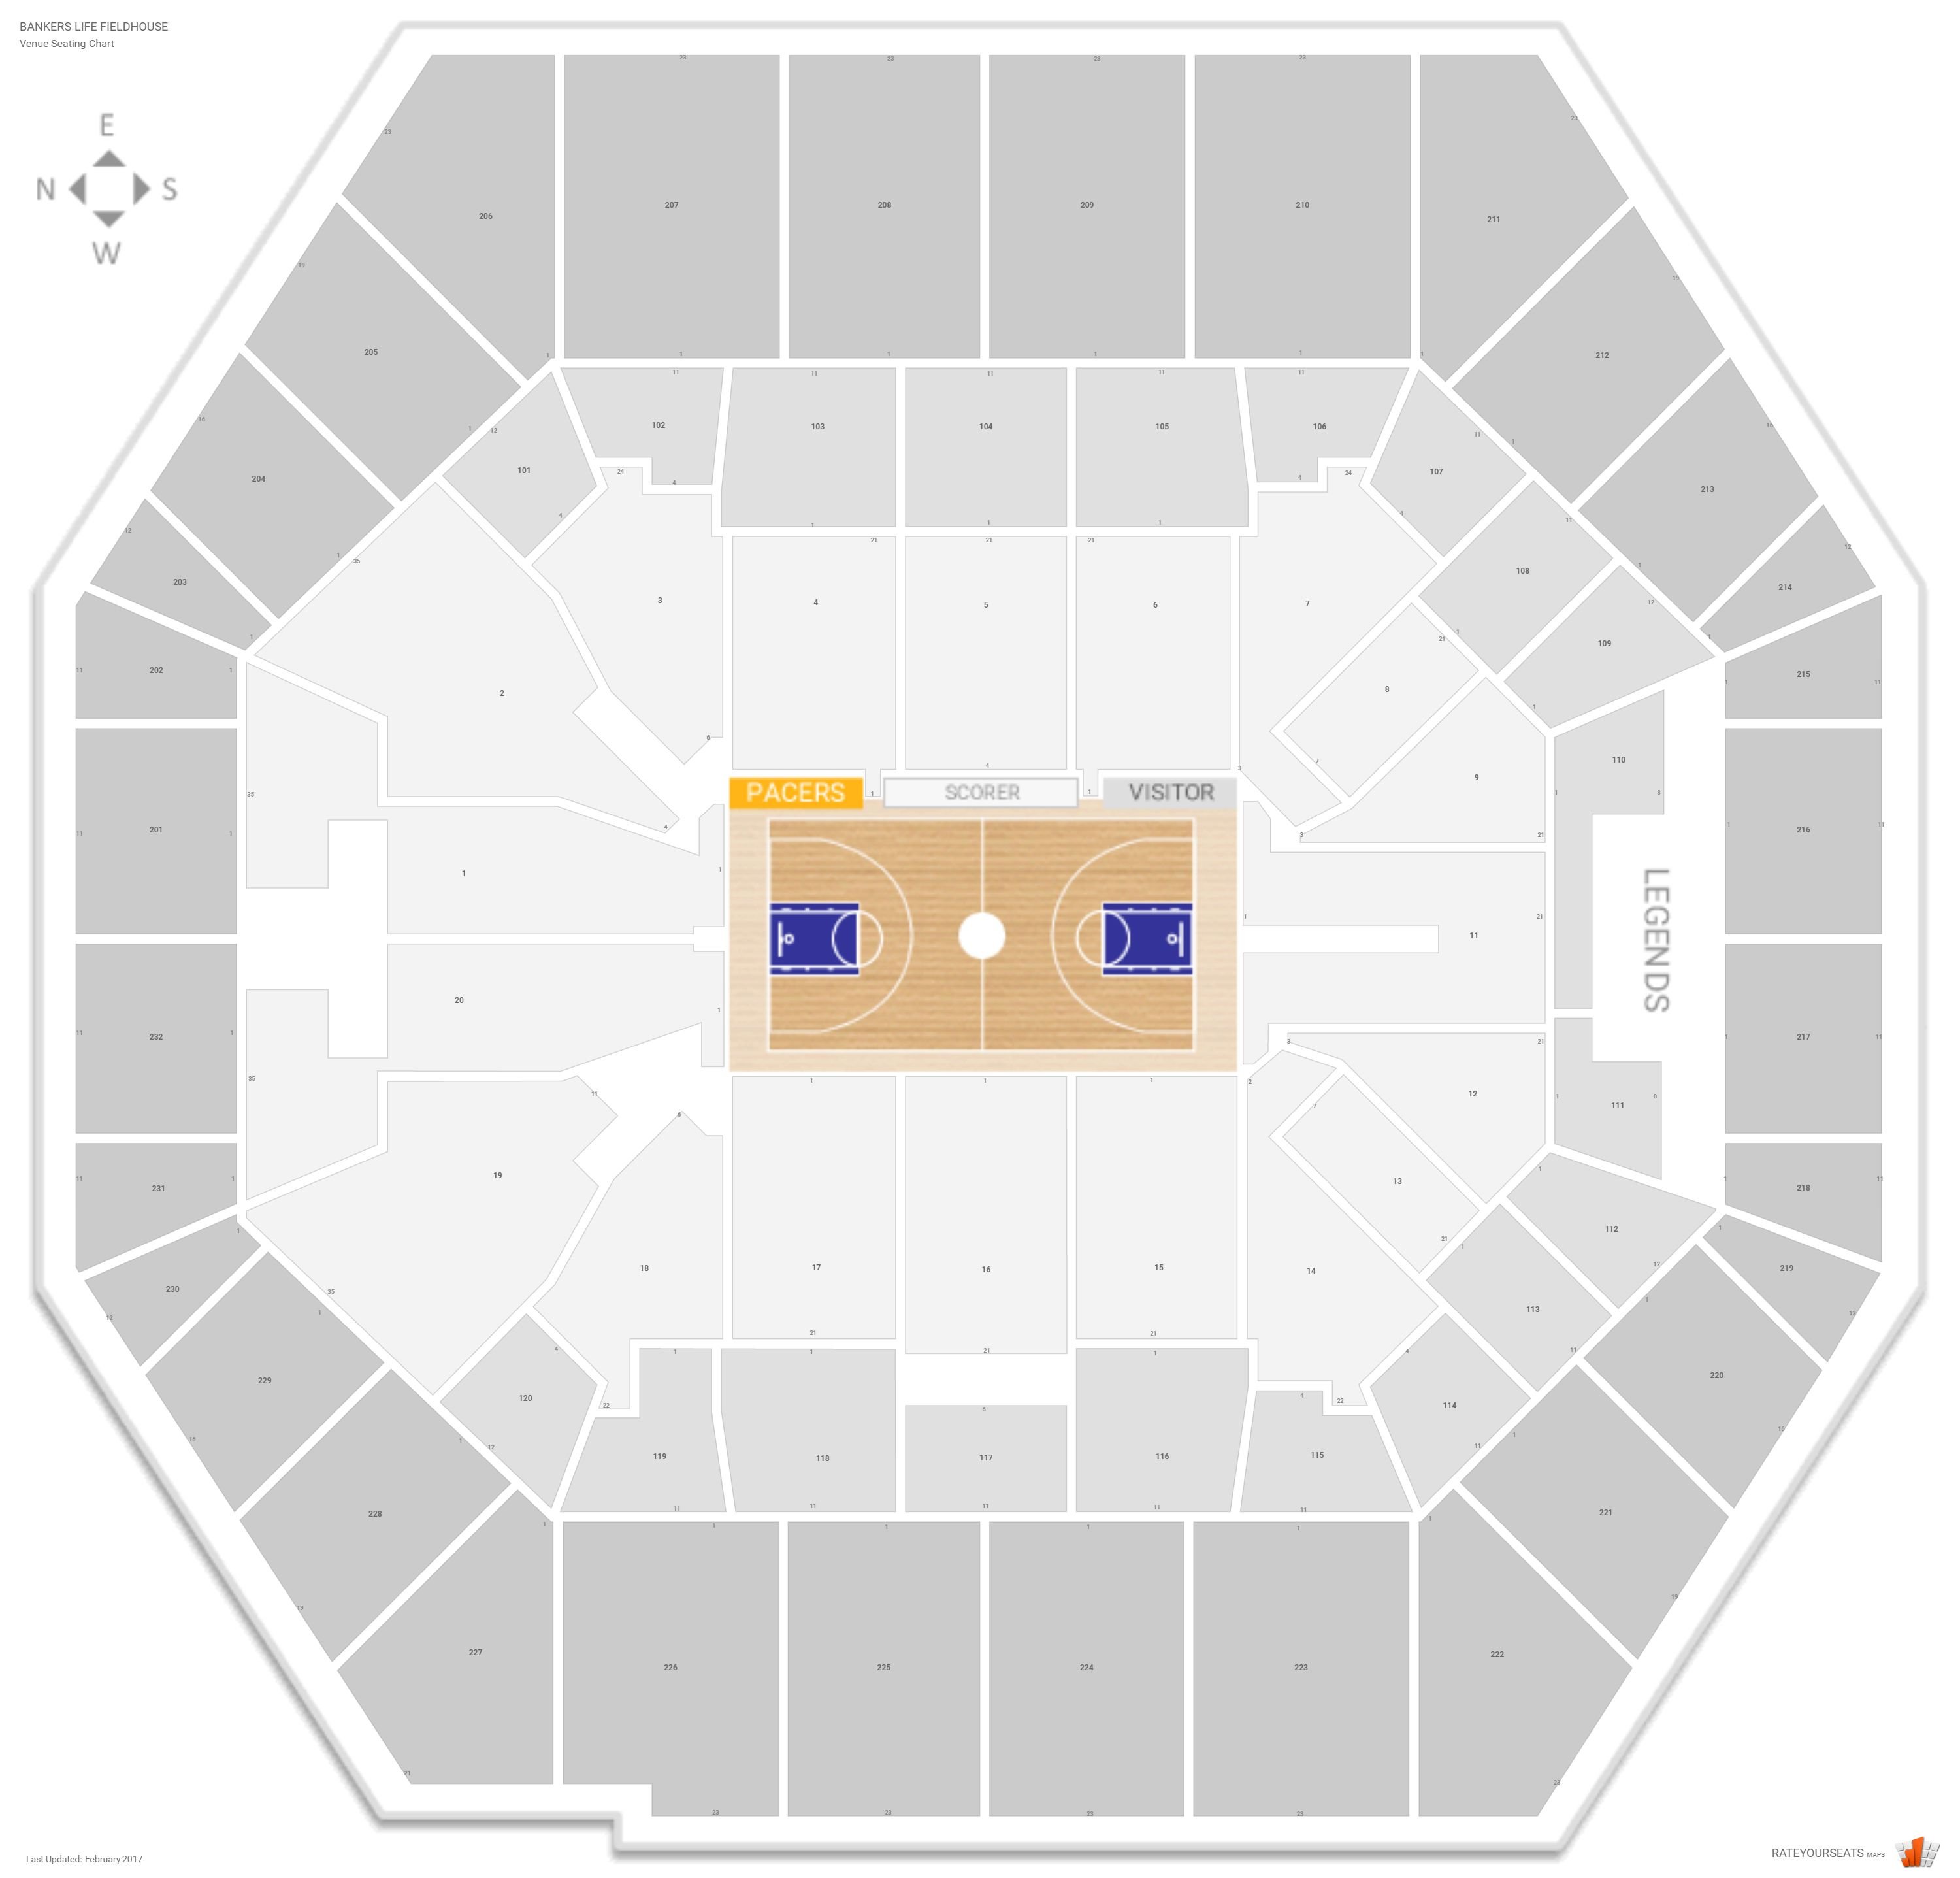 Pacers Seating Chart